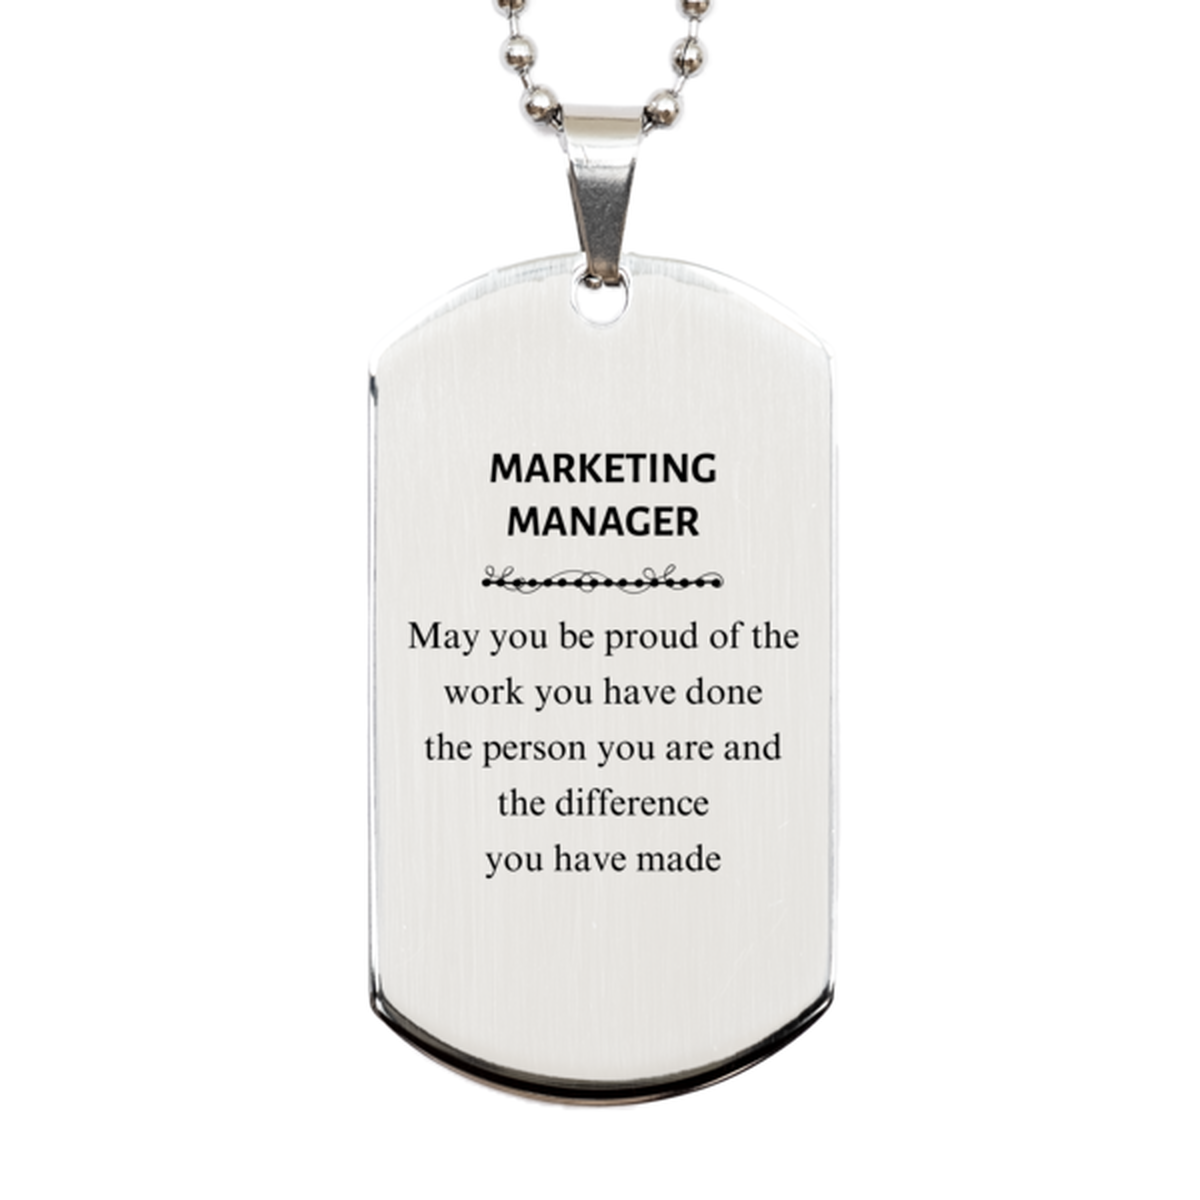 Marketing Manager May you be proud of the work you have done, Retirement Marketing Manager Silver Dog Tag for Colleague Appreciation Gifts Amazing for Marketing Manager